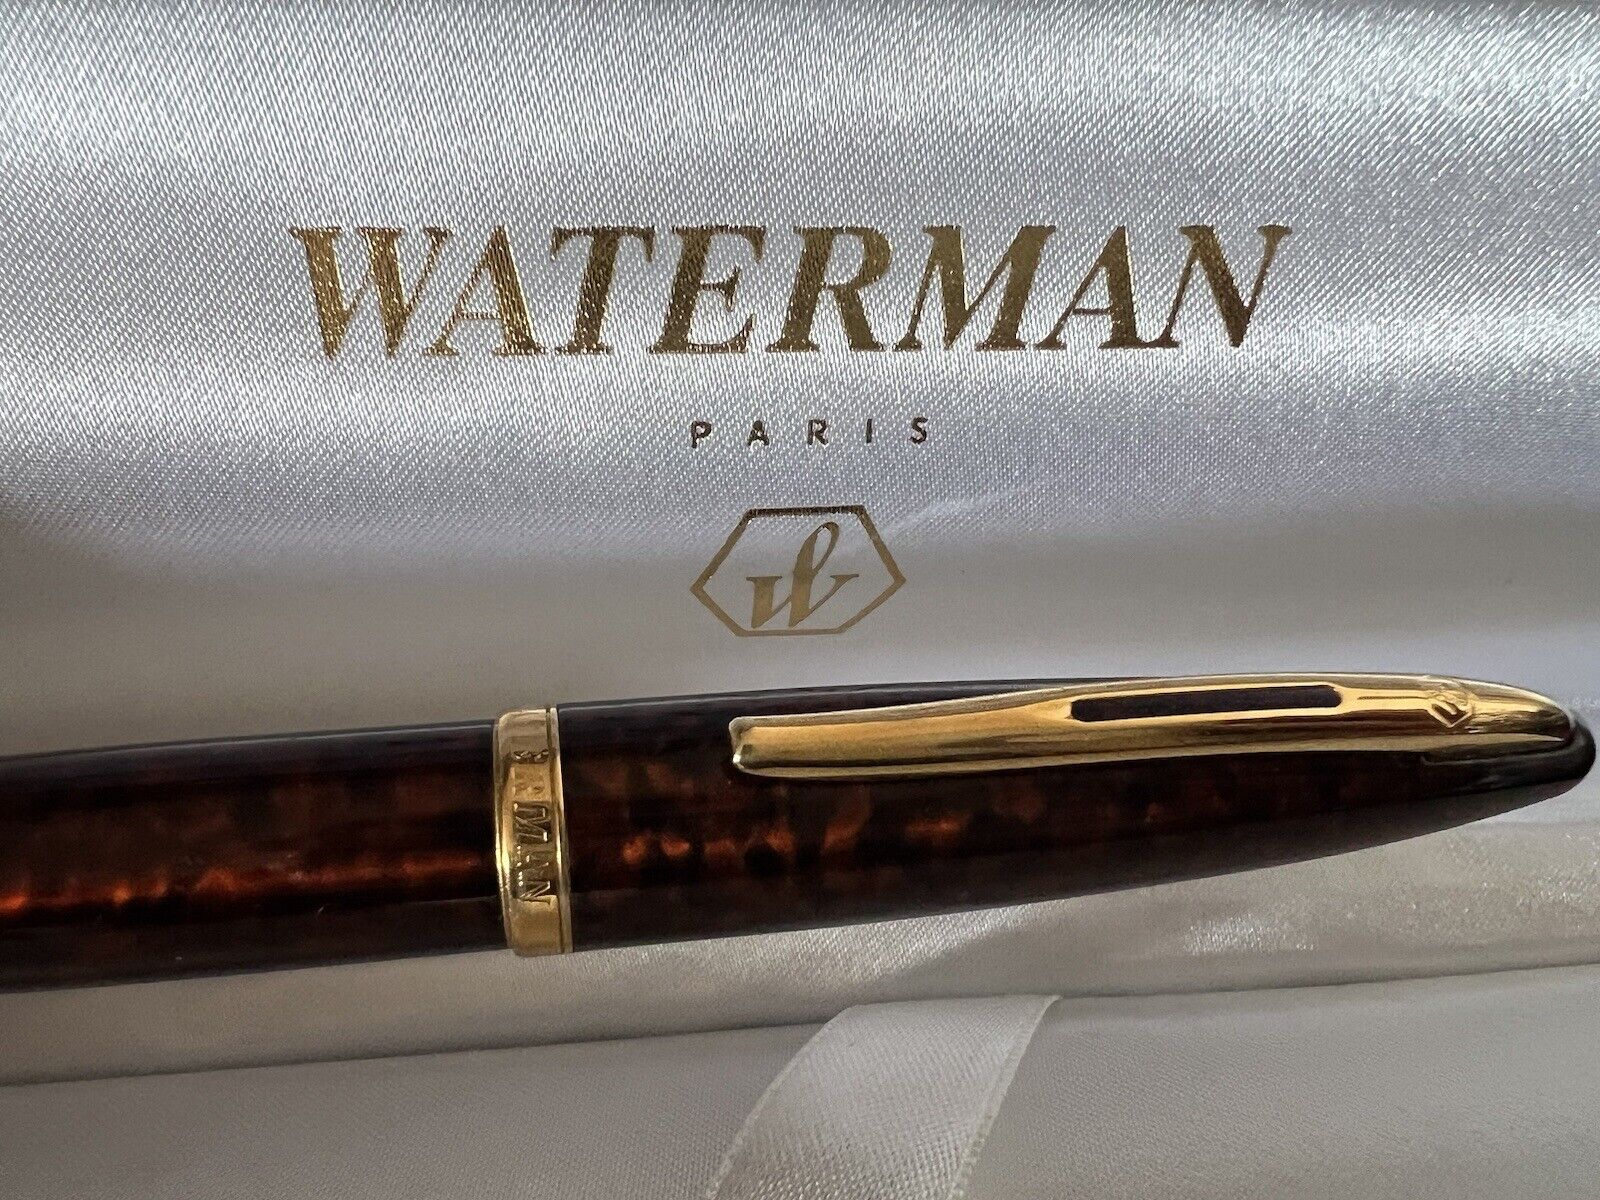 Waterman Pen Sphere Carene Deluxe Lacquer Marbled Gold